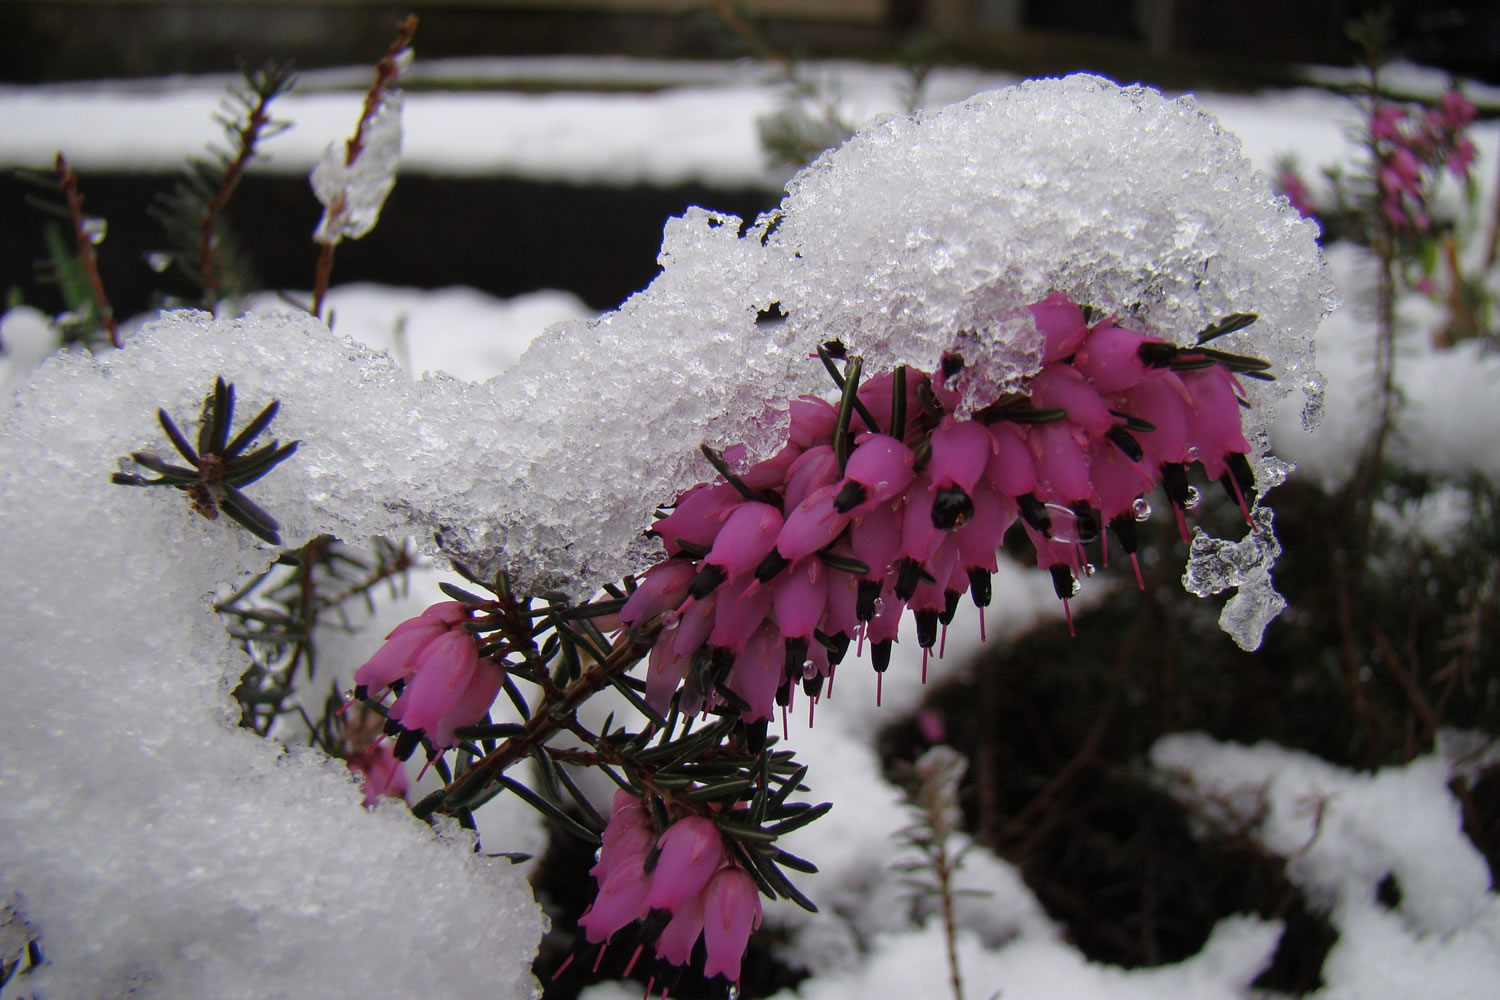 Snow fell March 1 on some already-blooming flowers east of Battle Ground.